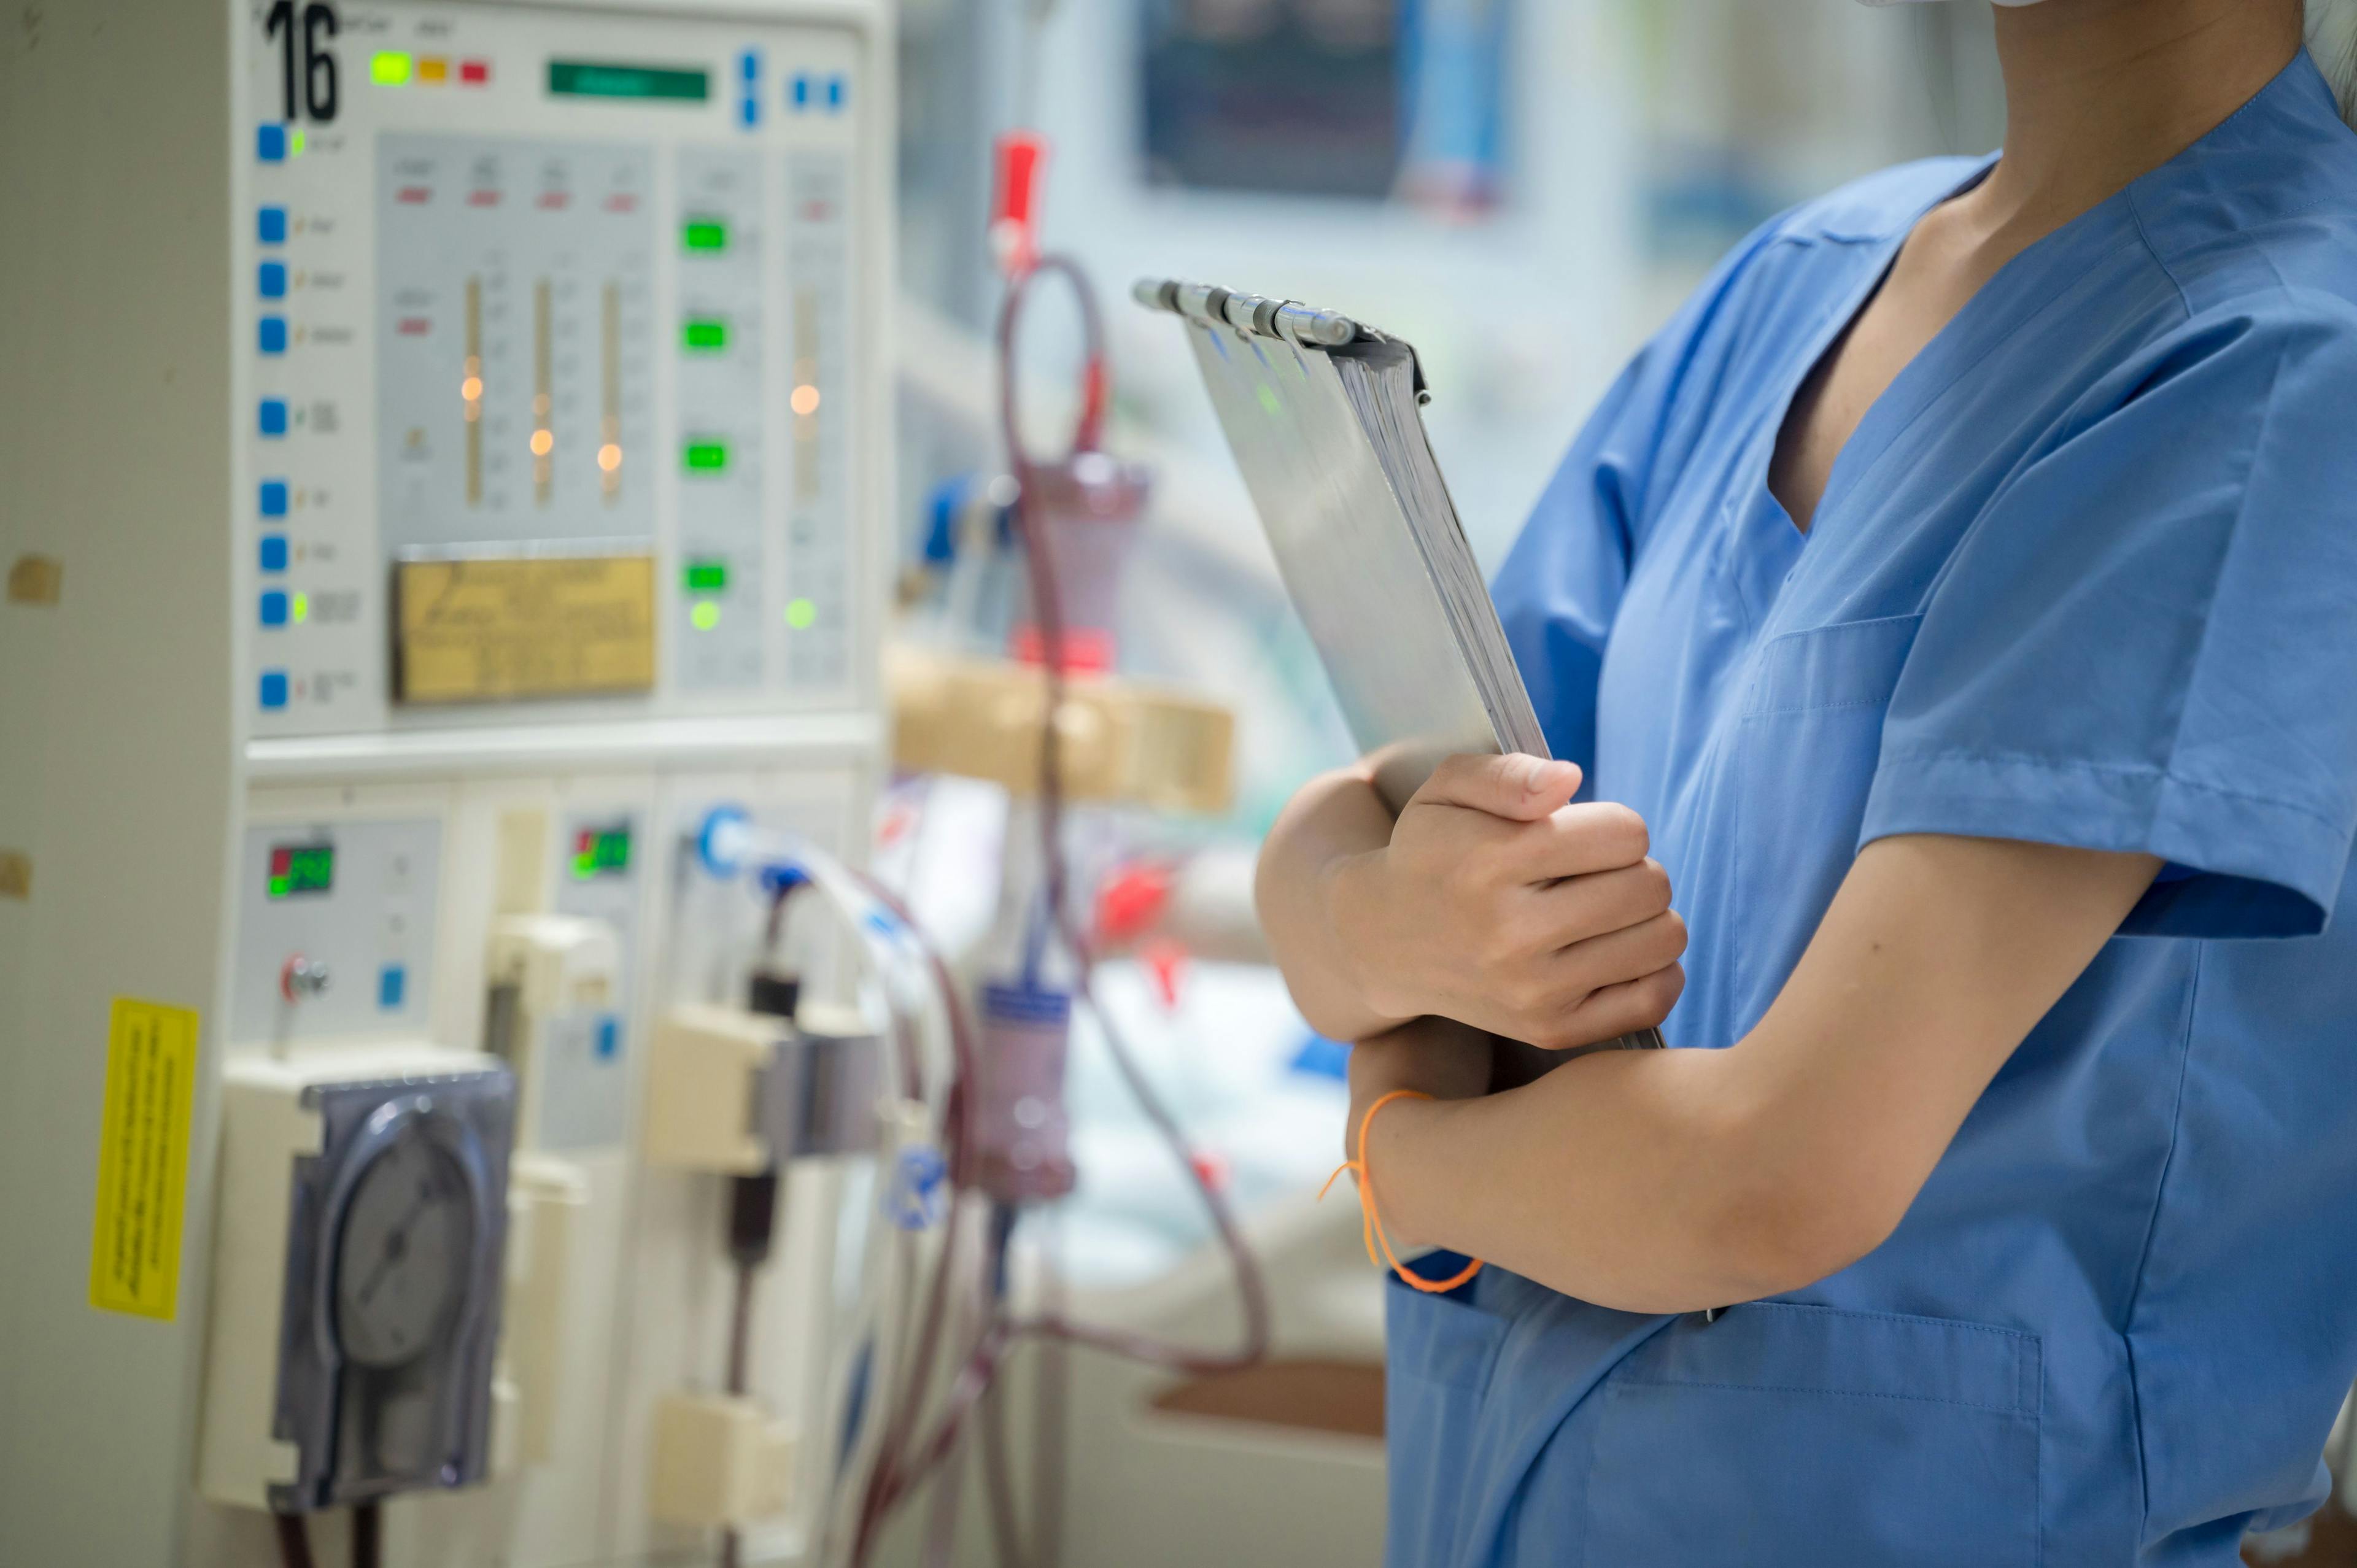 Medicare policy proposal jeopardizes care for those on dialysis | Viewpoint